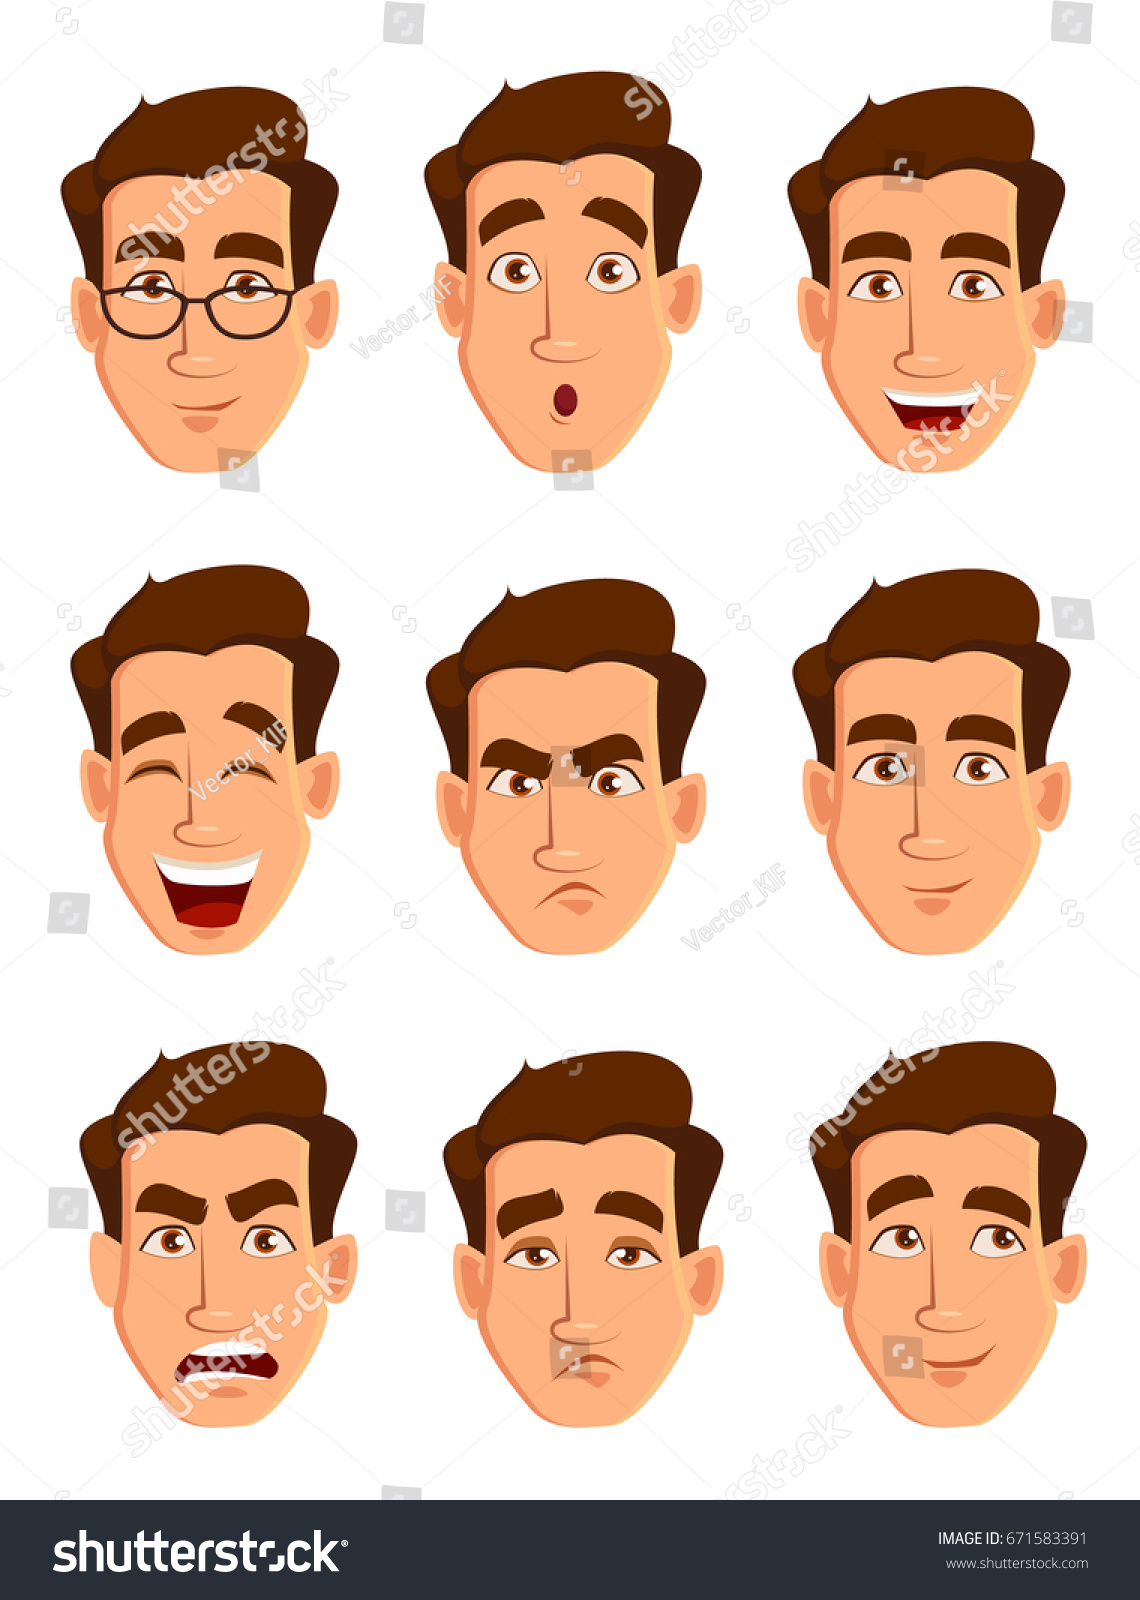 Expression Of Emotions In Men 19